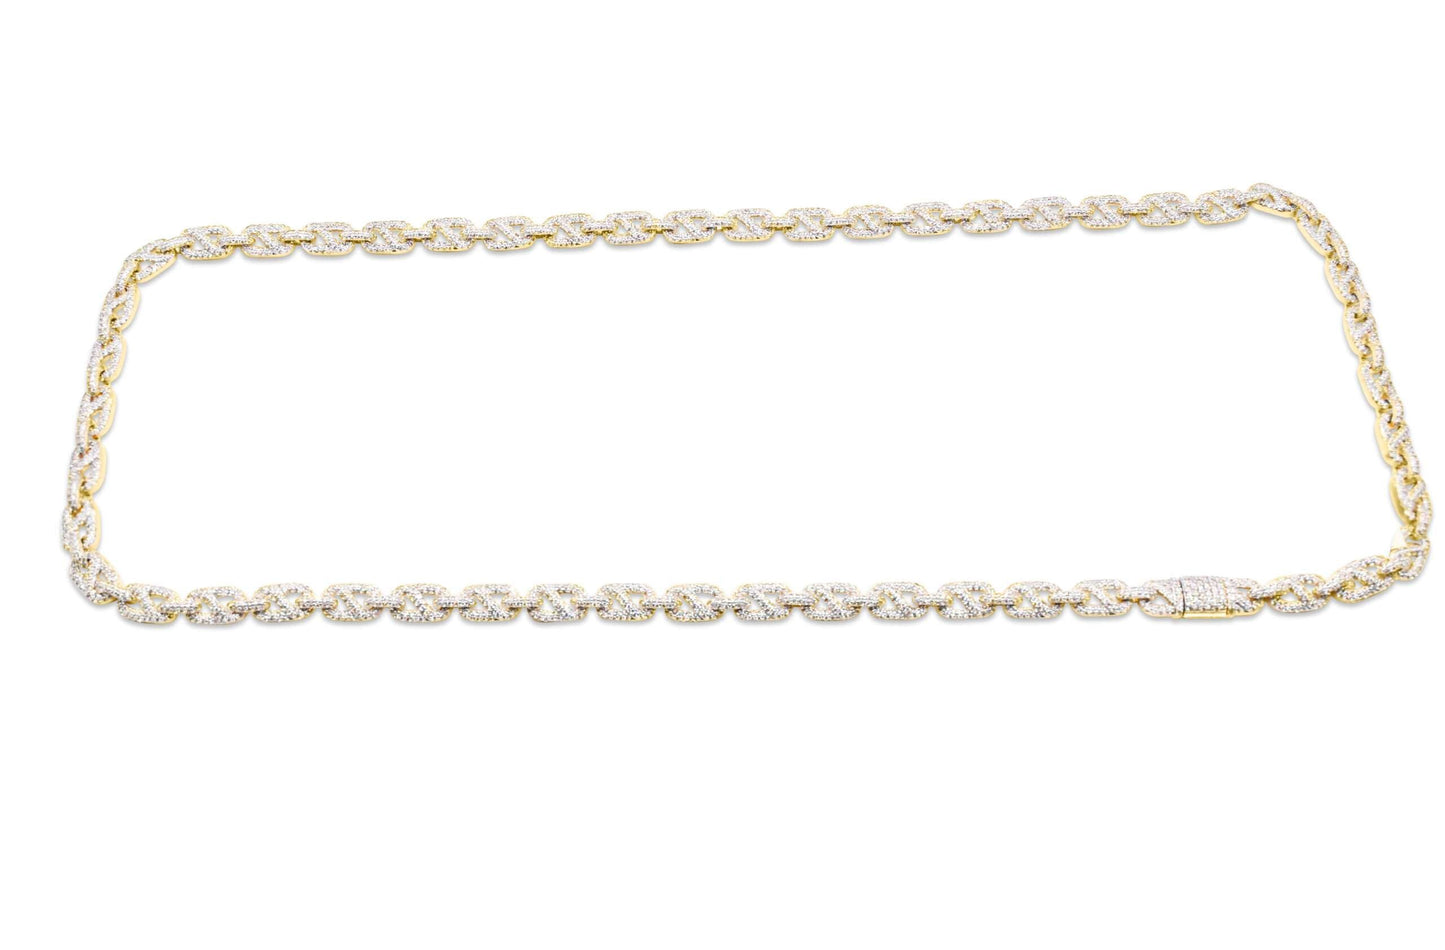 6mm 10K Iced Out Gold Diamond Chain 11.50CT